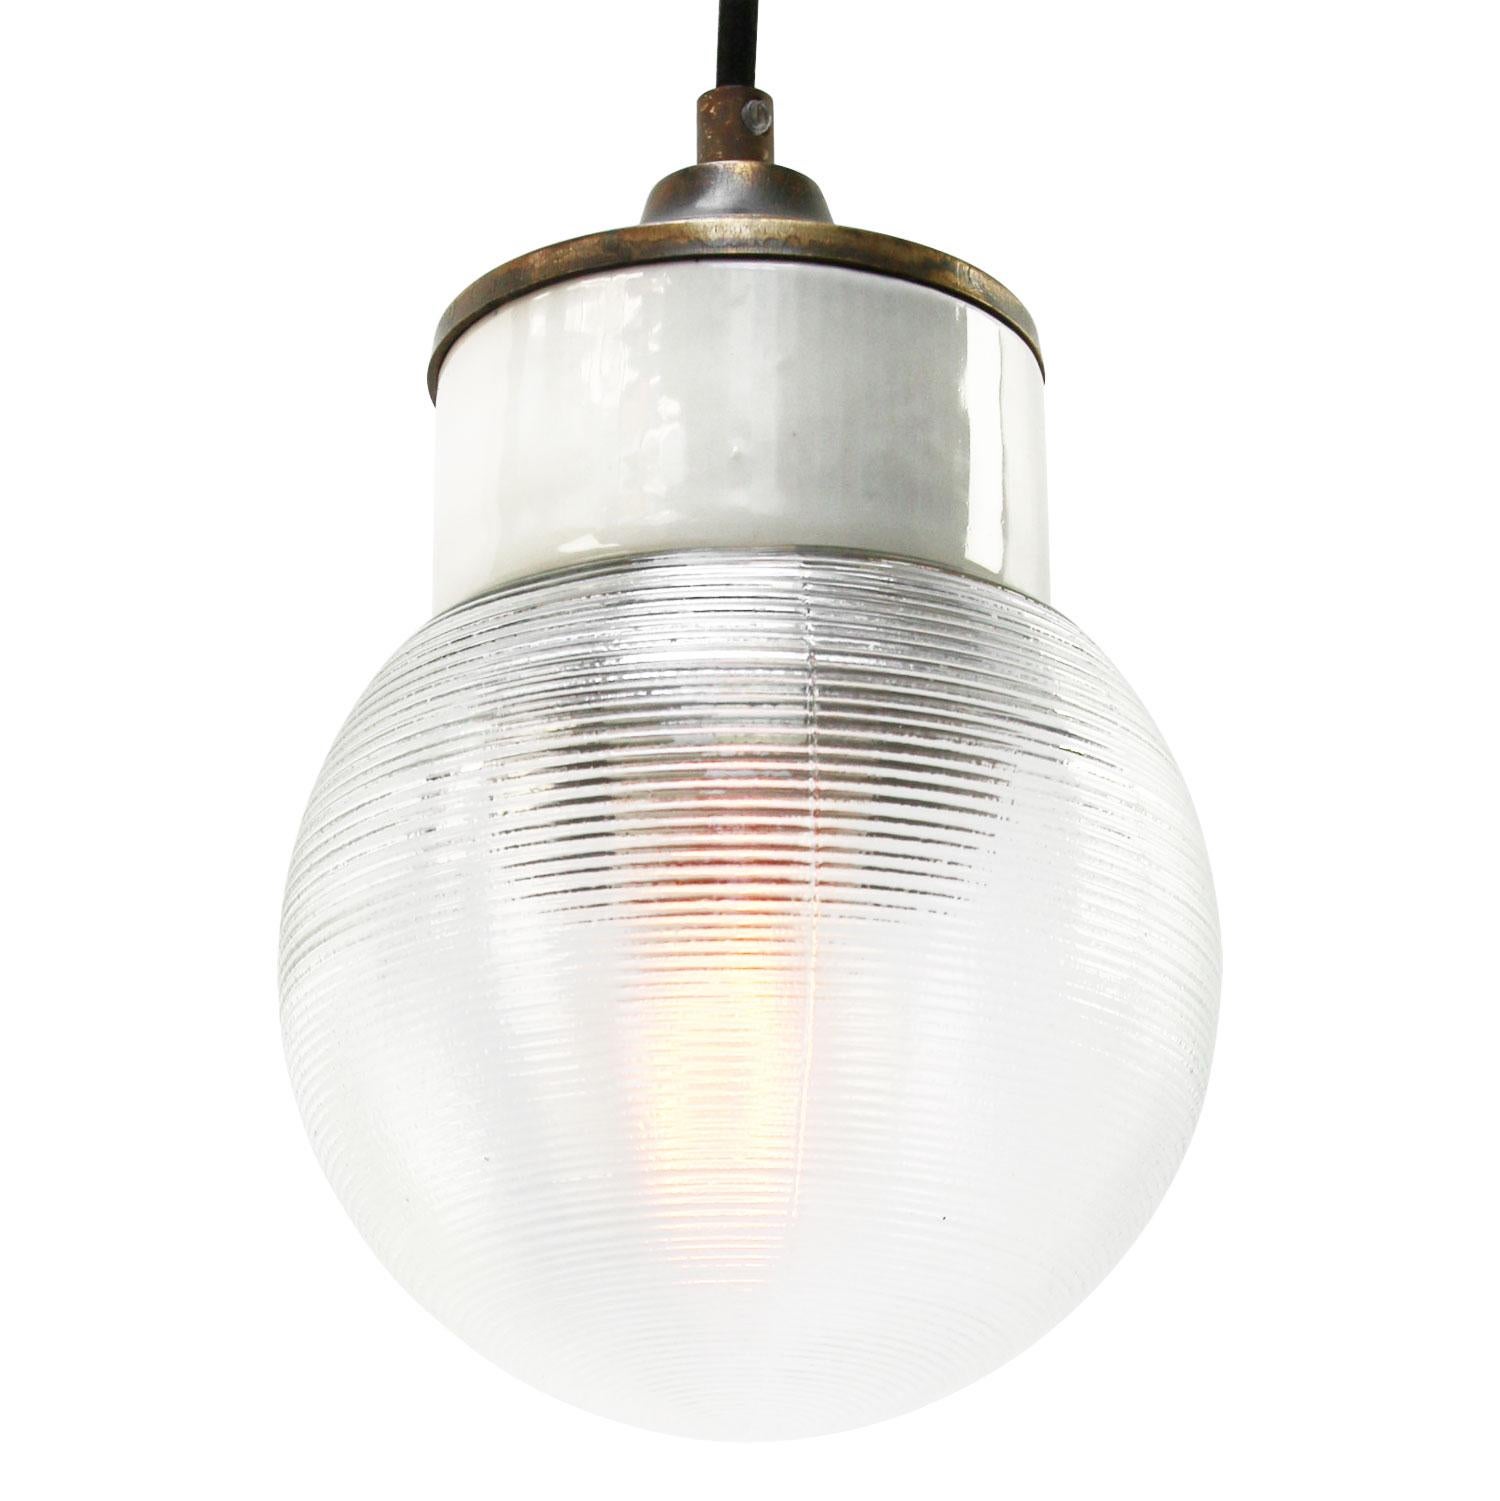 Porcelain industrial hanging lamp.
White porcelain, brass and clear striped glass.
2 conductors, no ground.

Weight: 1.20 kg / 2.6 lb

Priced per individual item. All lamps have been made suitable by international standards for incandescent